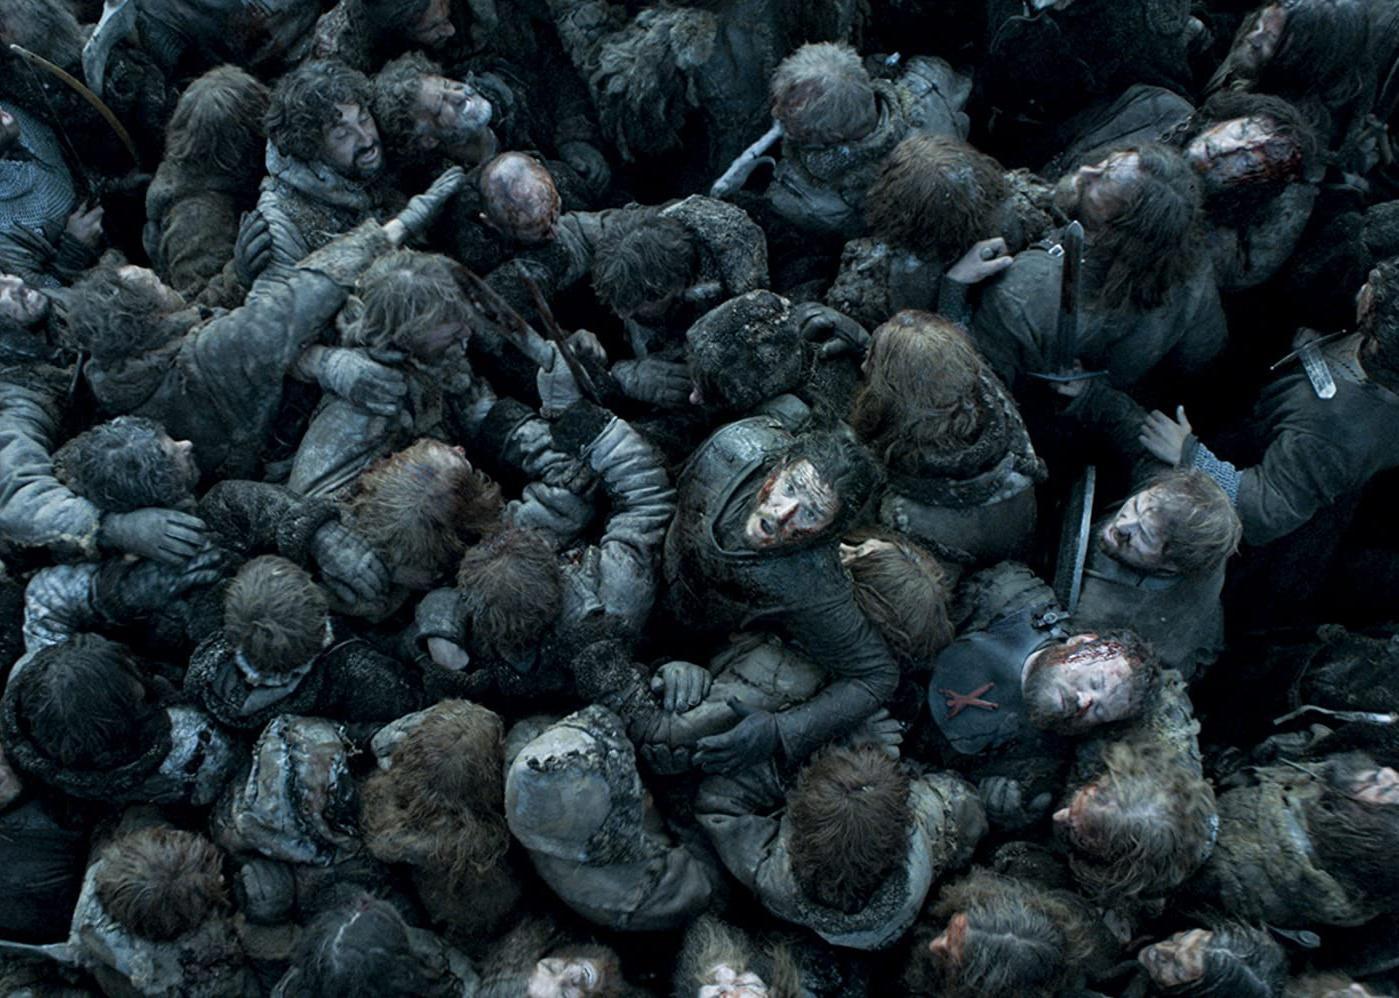 Kit Harington, in a sea of people in battle, looking up.